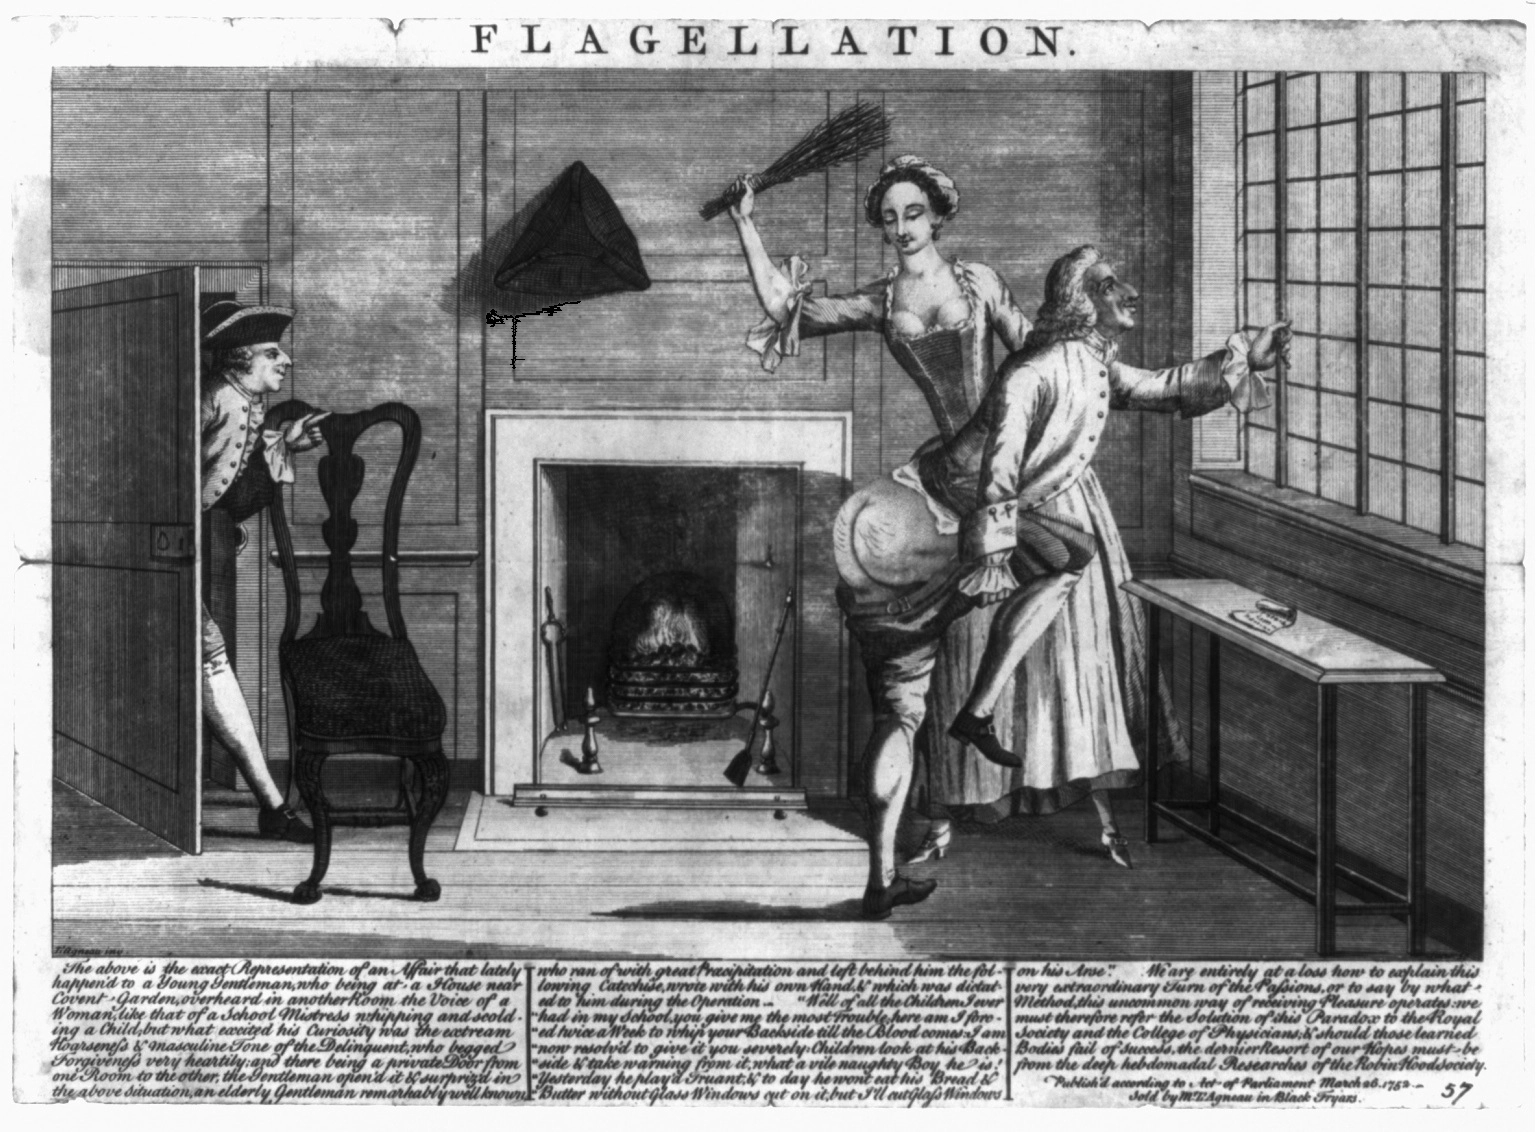 Sexual flagellation in early modern times